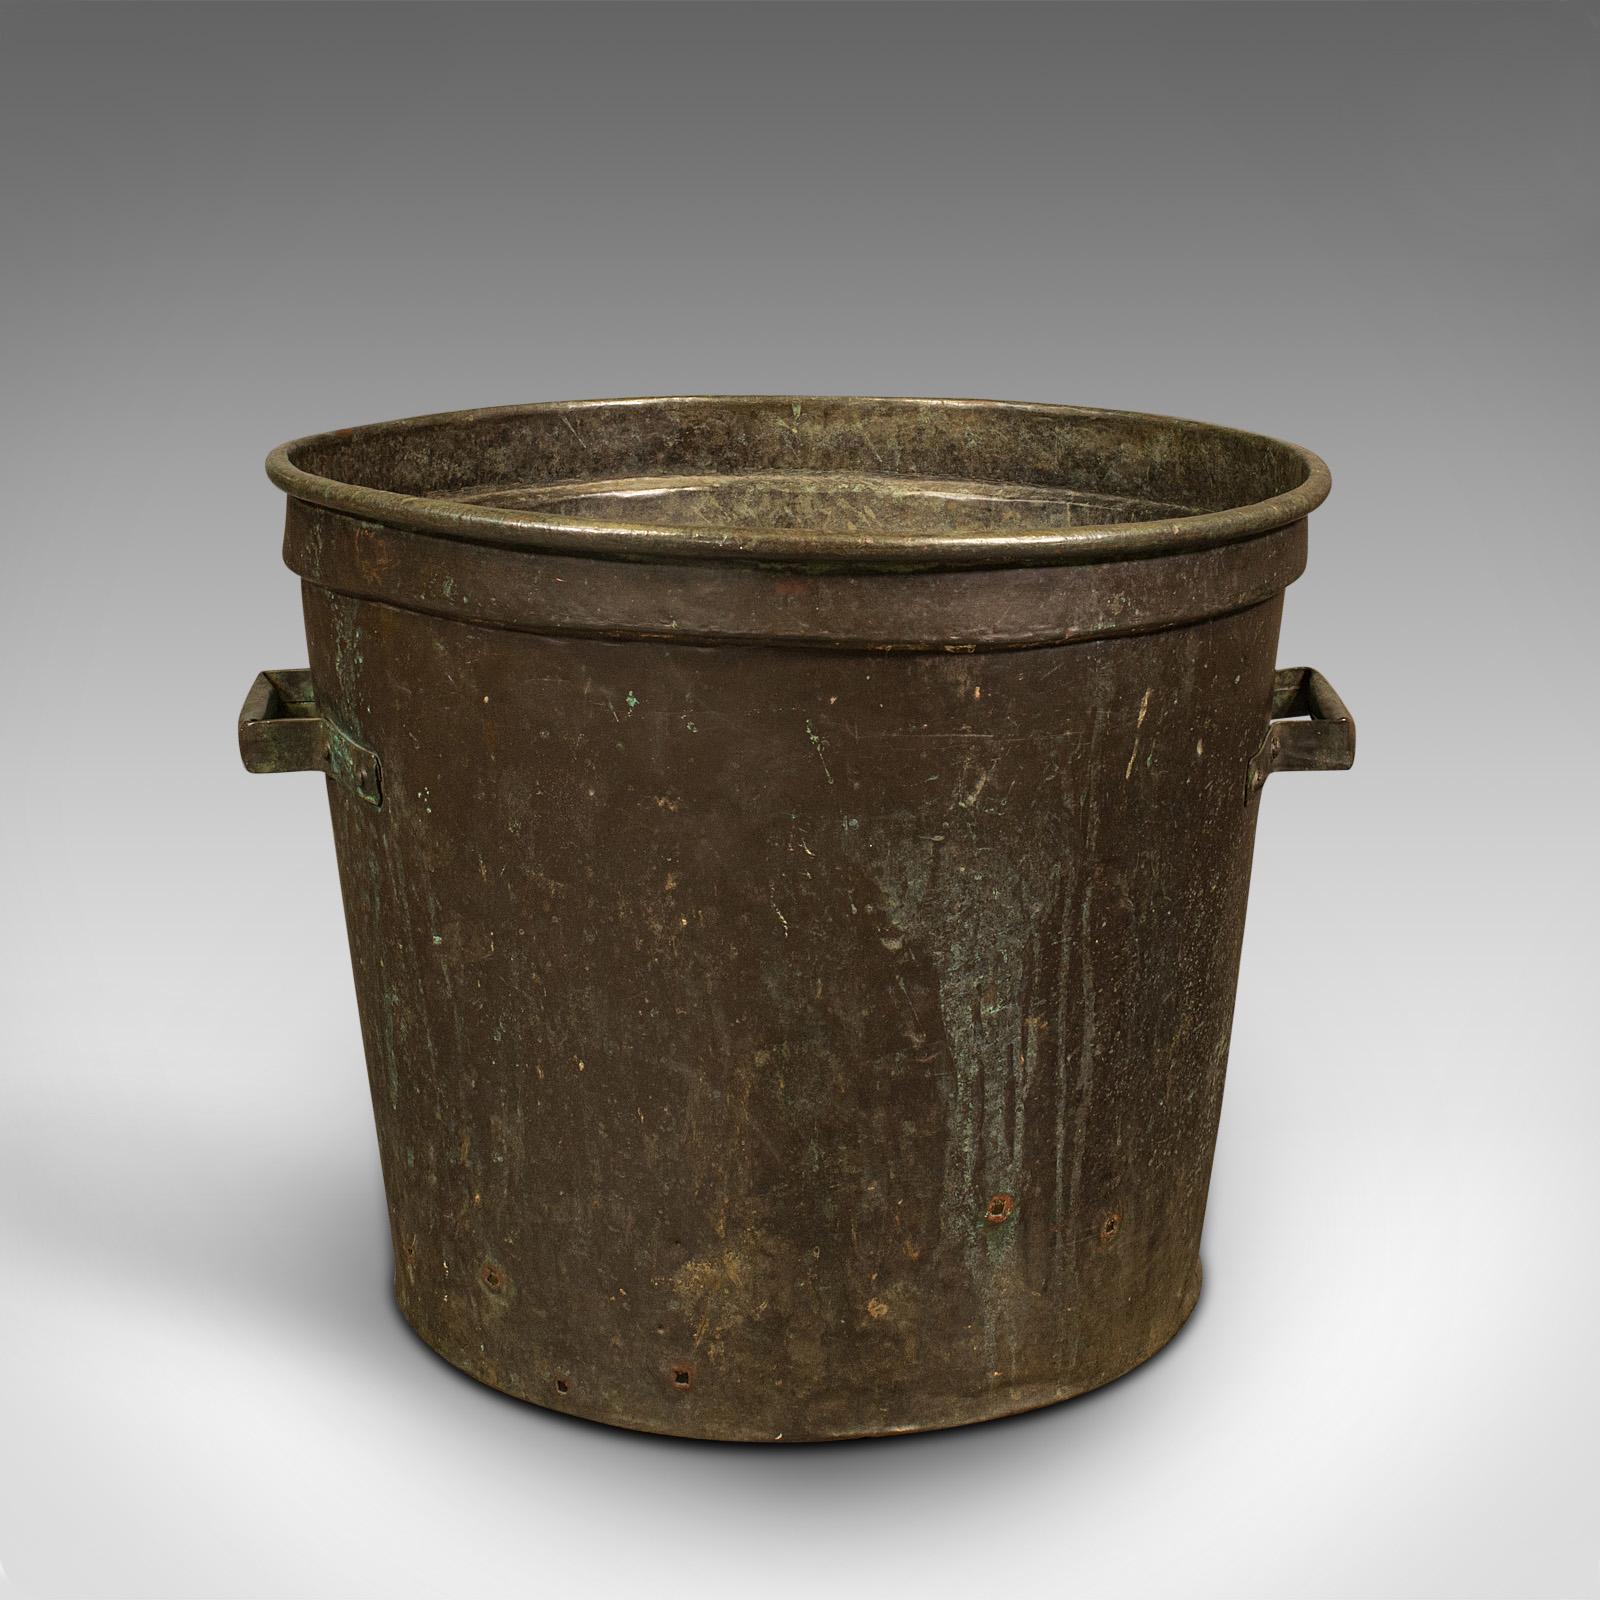 This is a large antique planter. An English, copper log bucket or jardiniere pot, dating to the early Victorian period, circa 1850.

Generous size and superb patination
Displays a desirable aged patina and in good order
Weathered copper a treat of